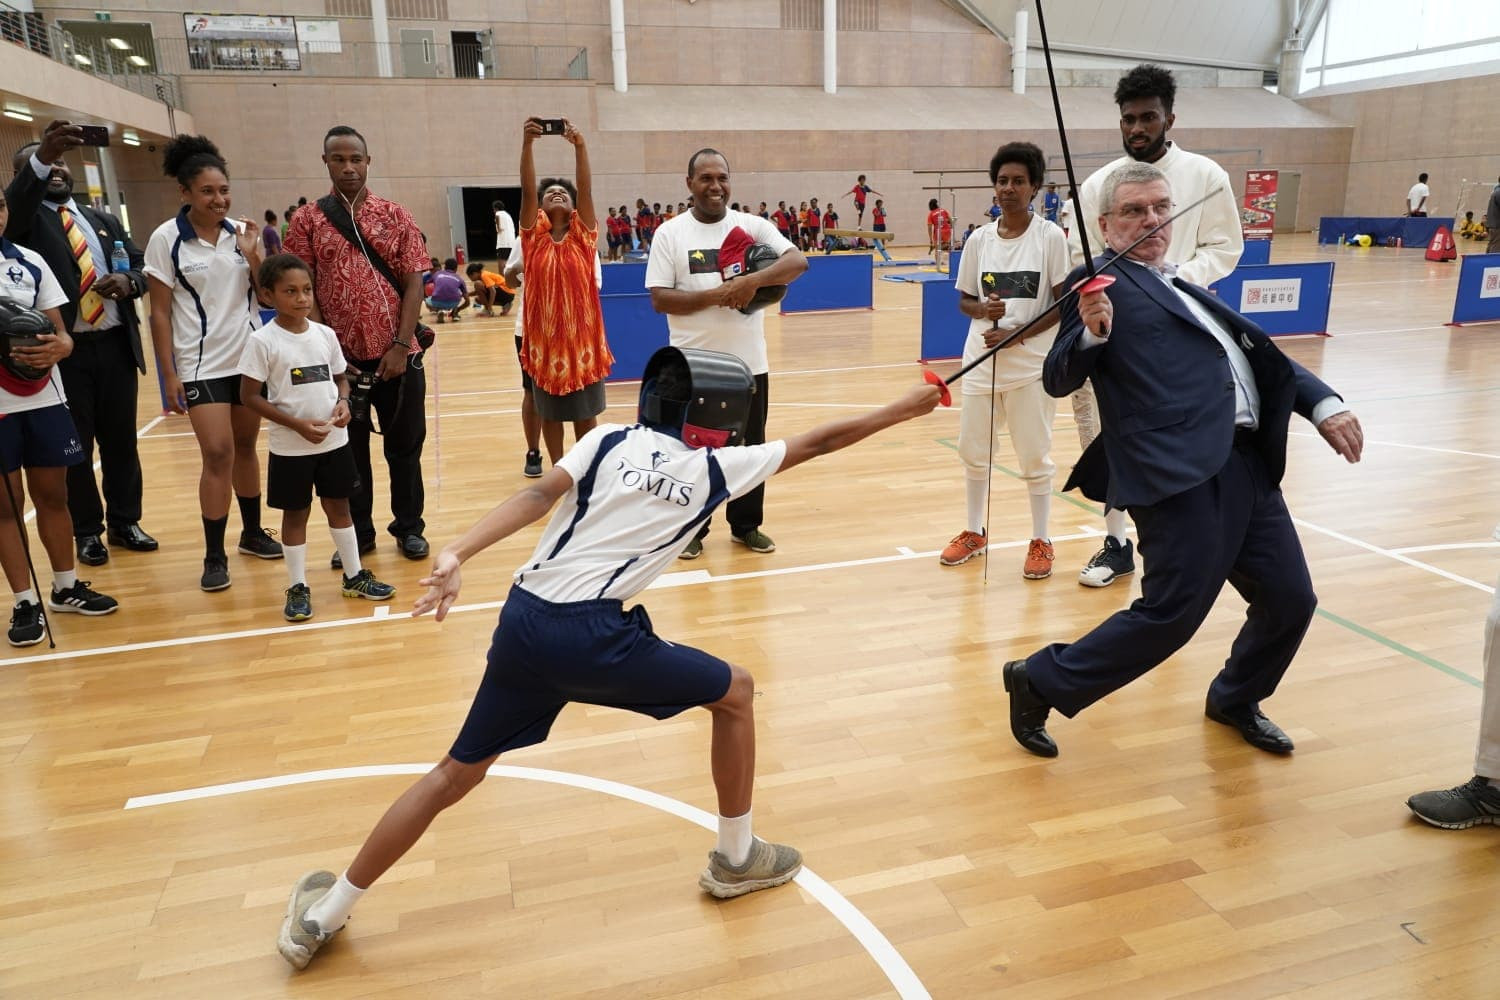 IOC President Thomas Bach visited Taurama Aquatic and Indoor Centre in Papua New Guinea, where he displayed his fencing skills ©Facebook